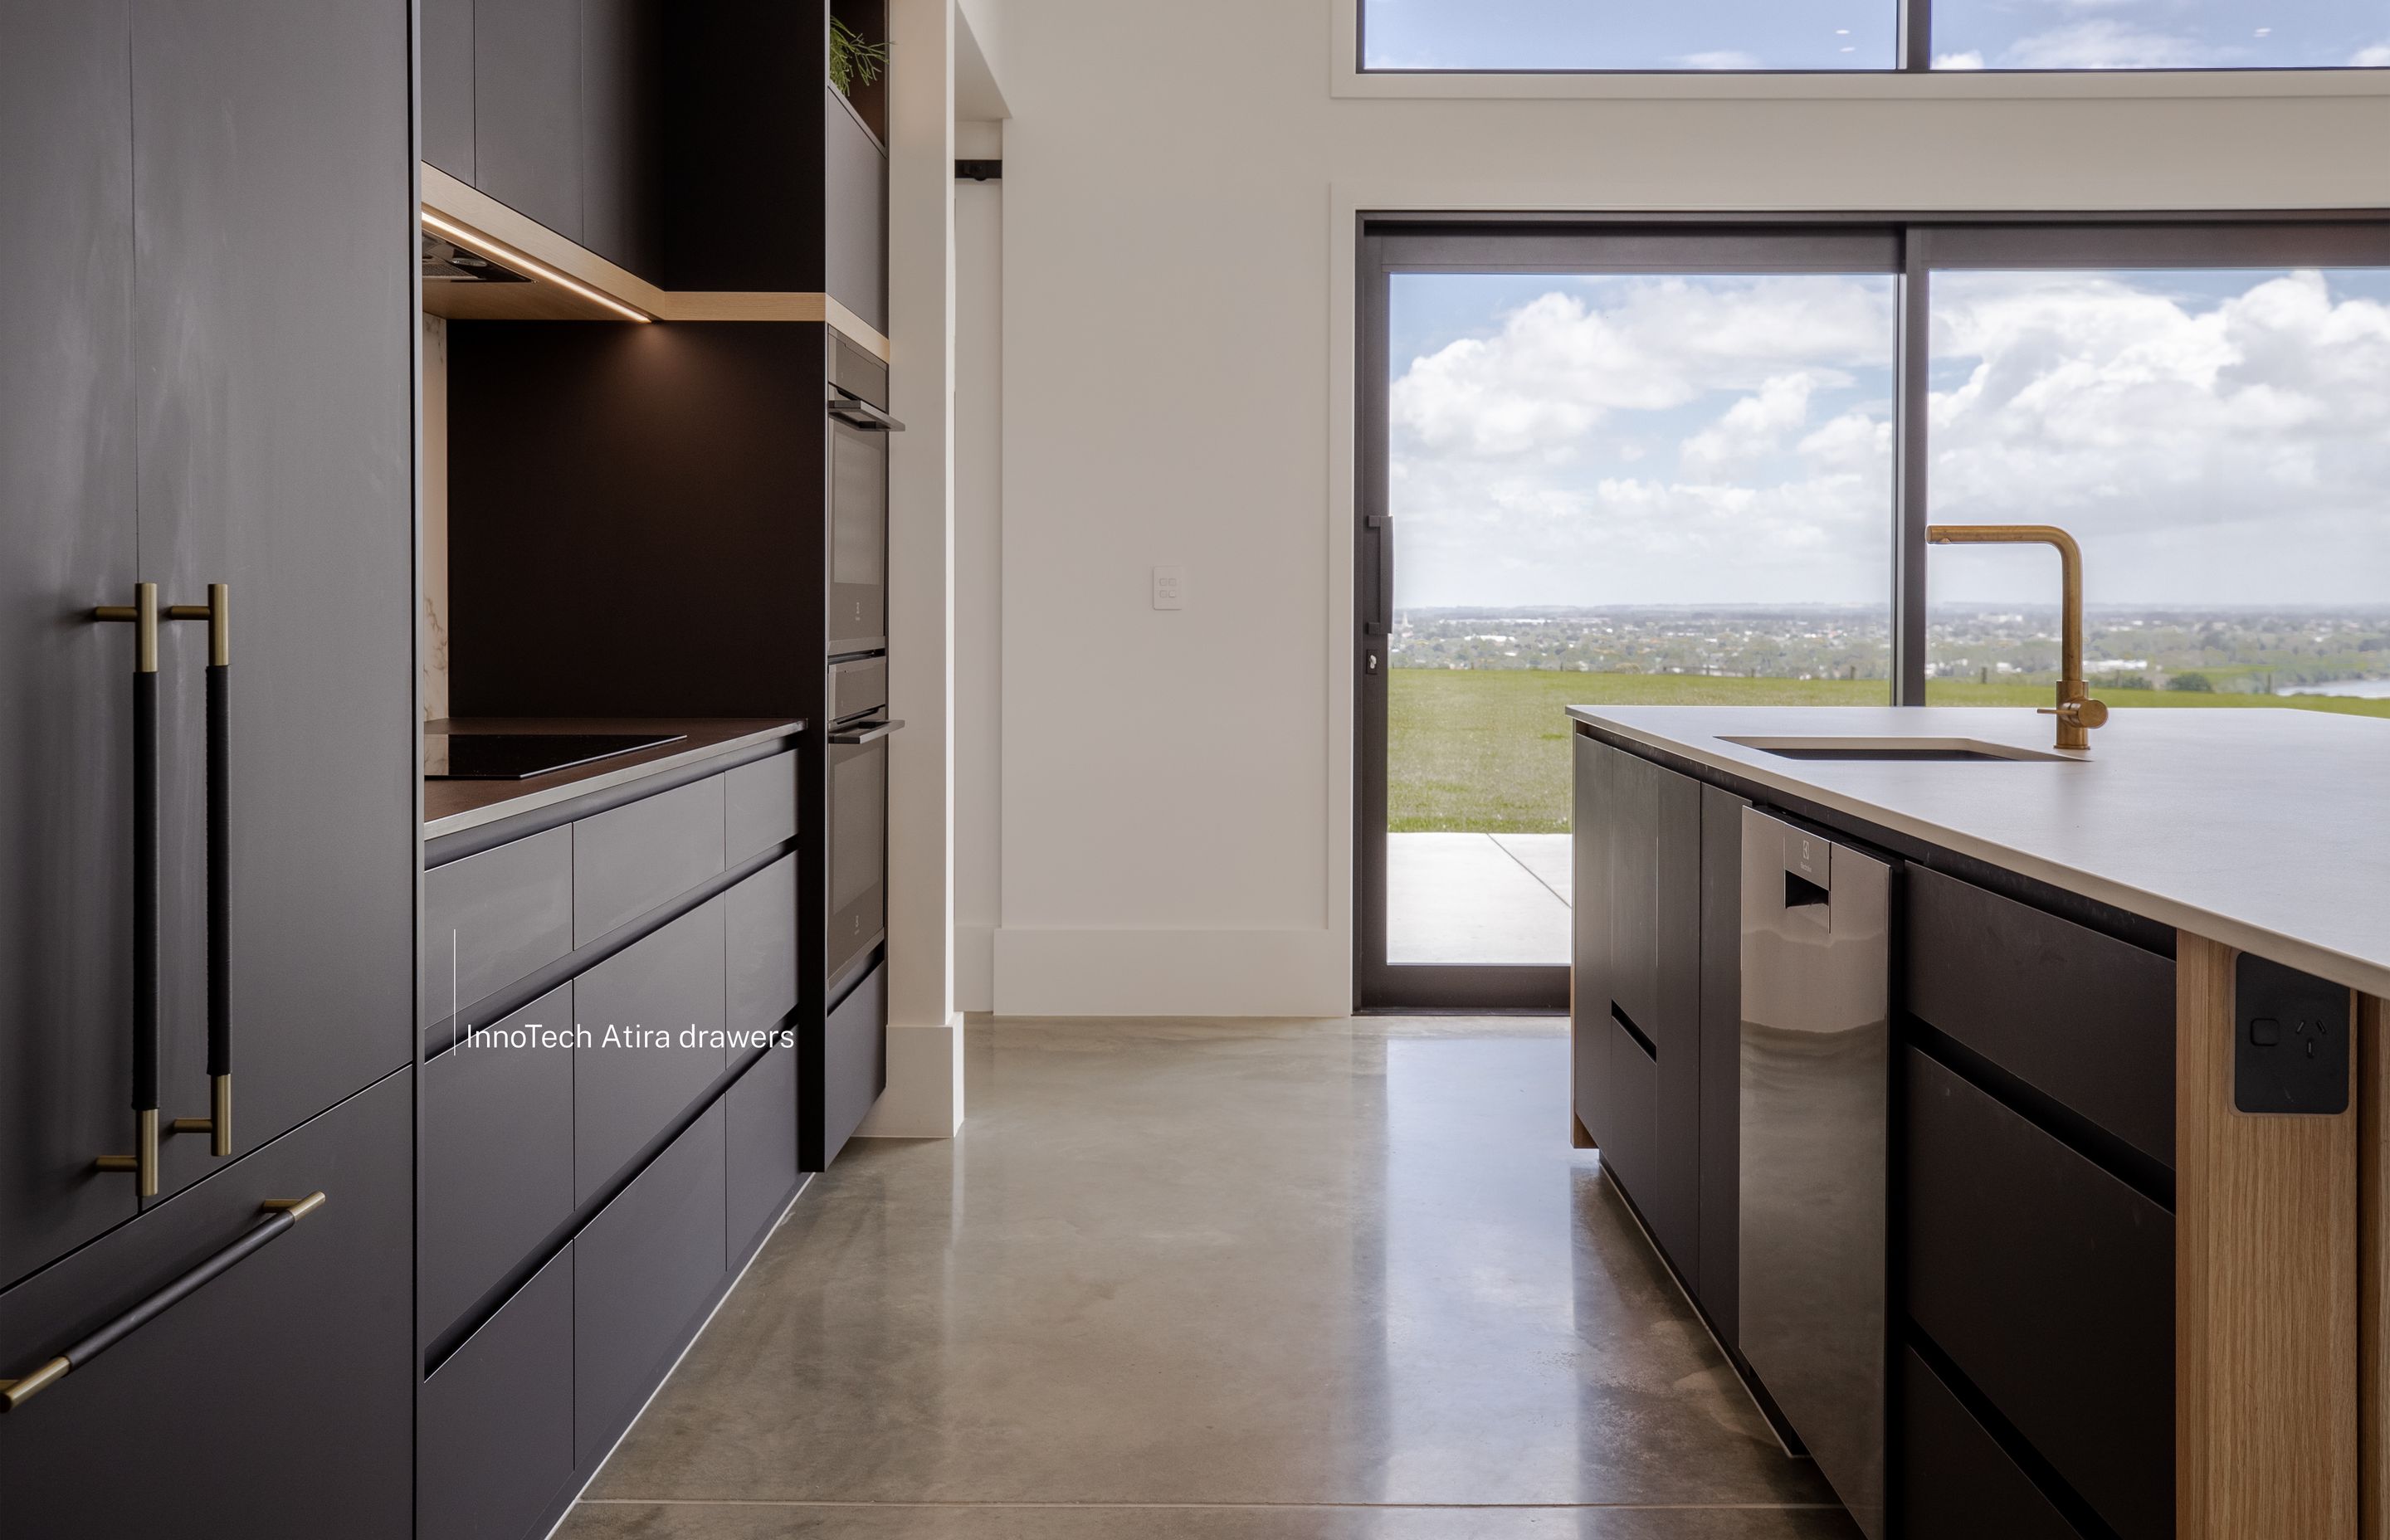 Stunning views of the city from the main kitchen that uses matt black materials for a feature kitchen.